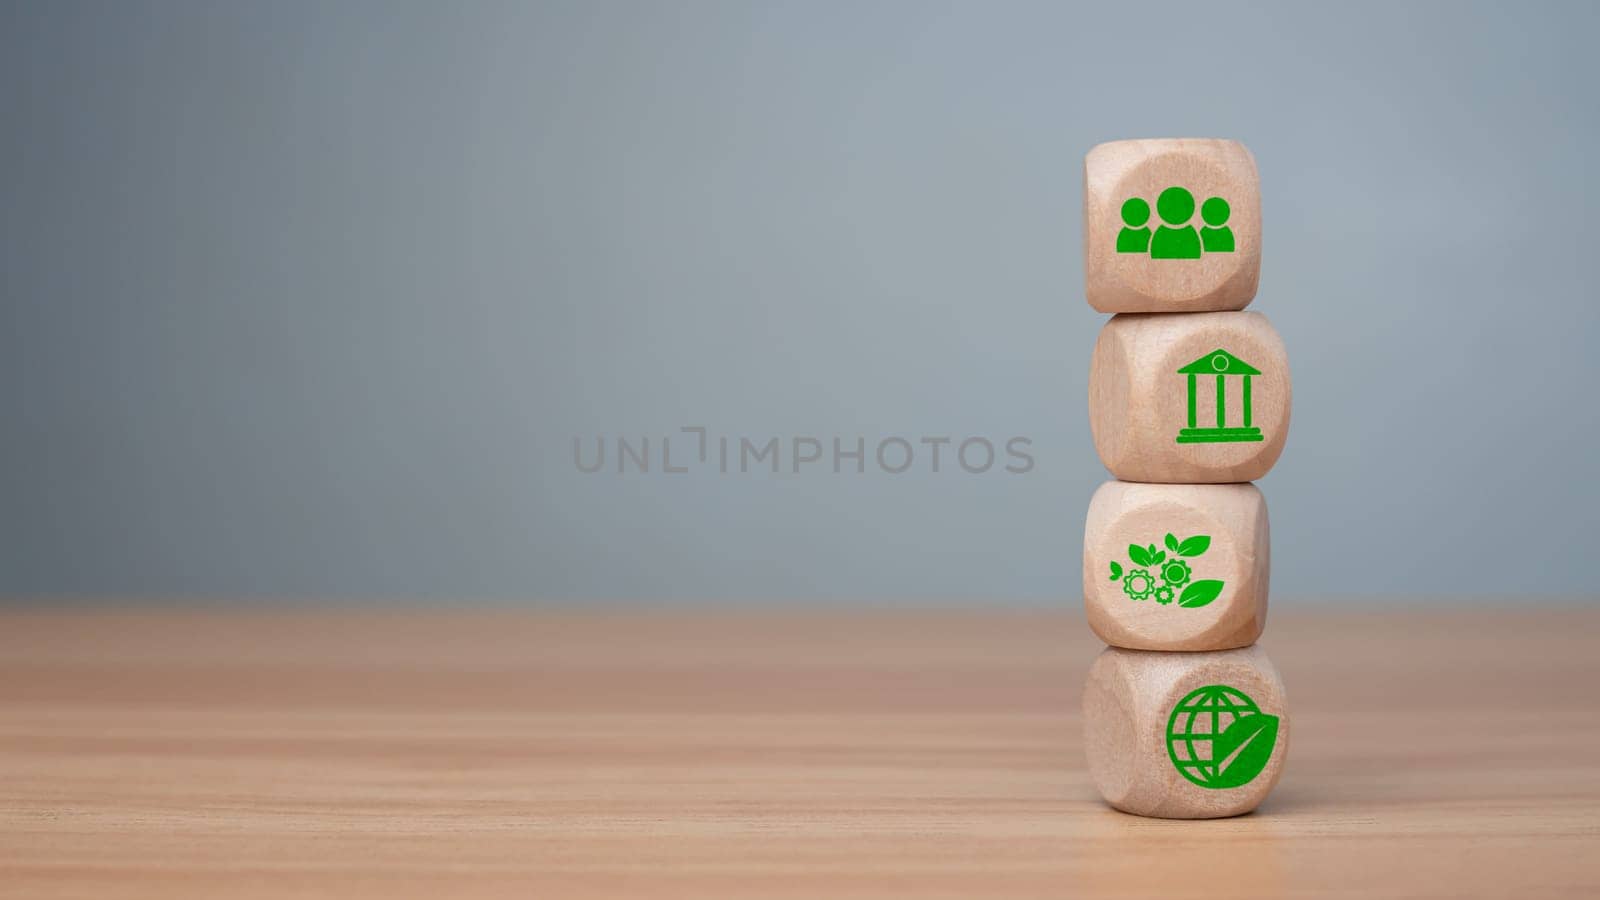 ESG concept of environmental, social and governance, wood block and icon on wooden background It is an idea for sustainable organizational development ​account the green environment. by Unimages2527